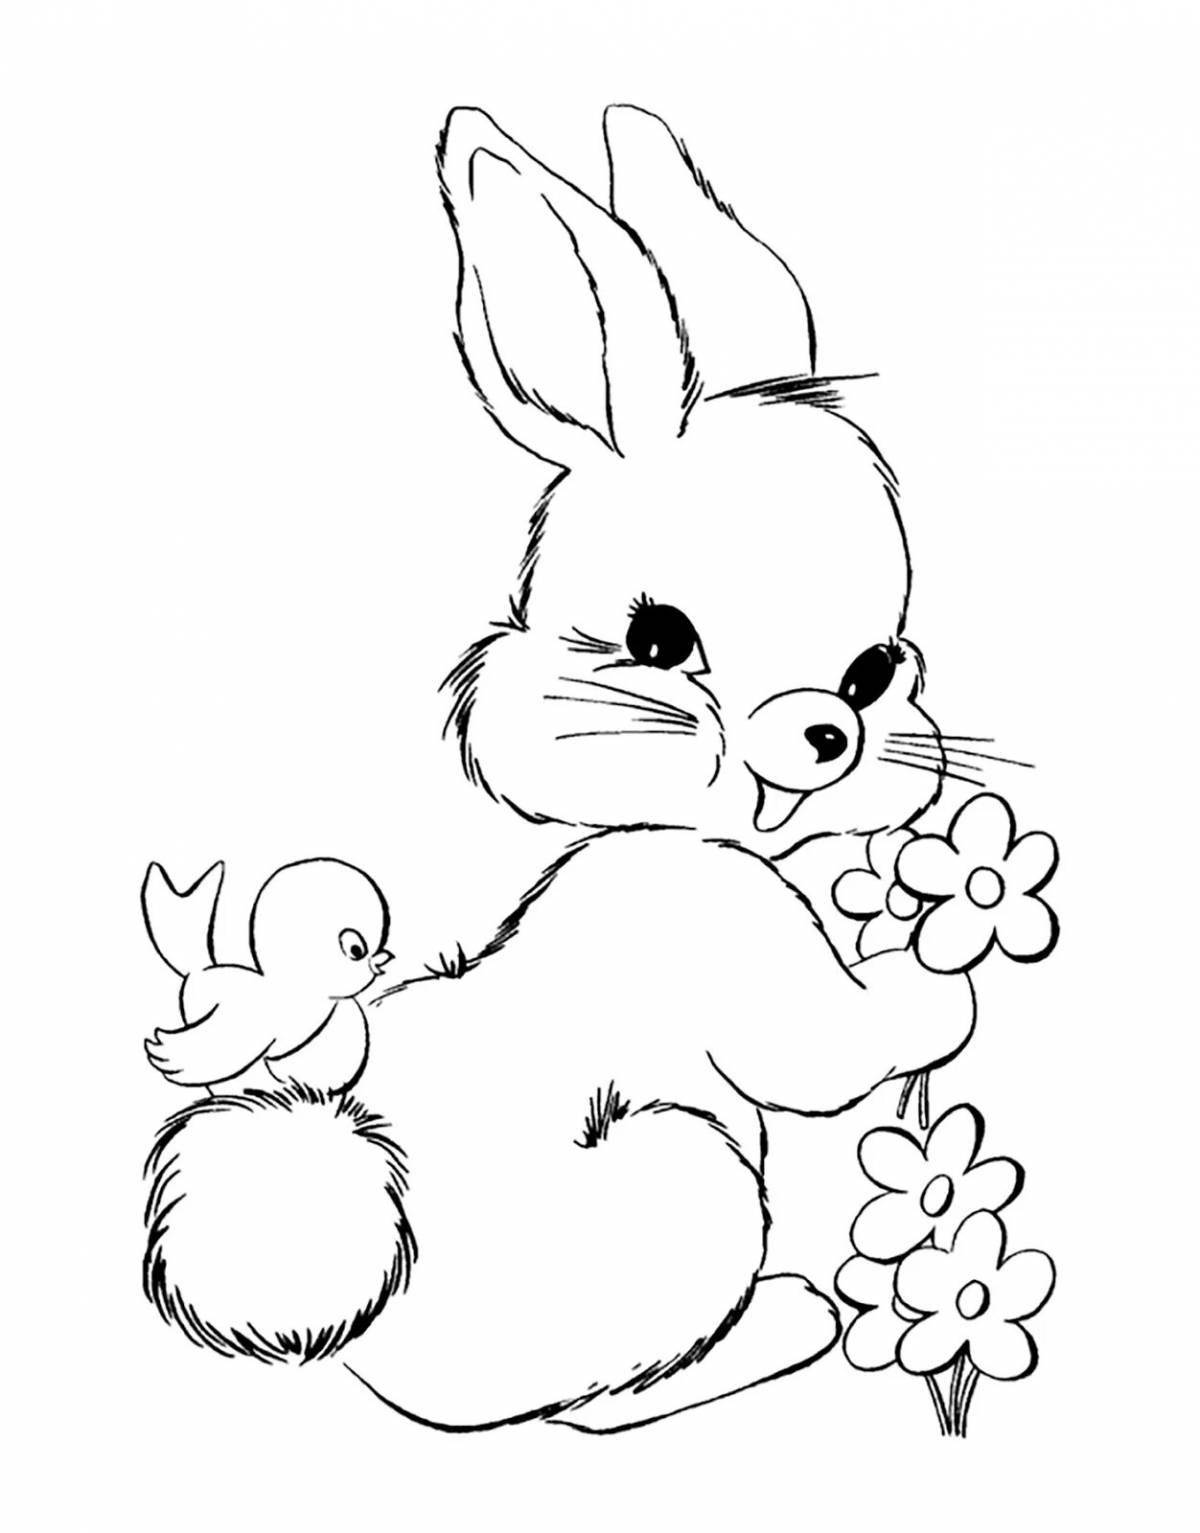 Shiny bunny coloring book for kids